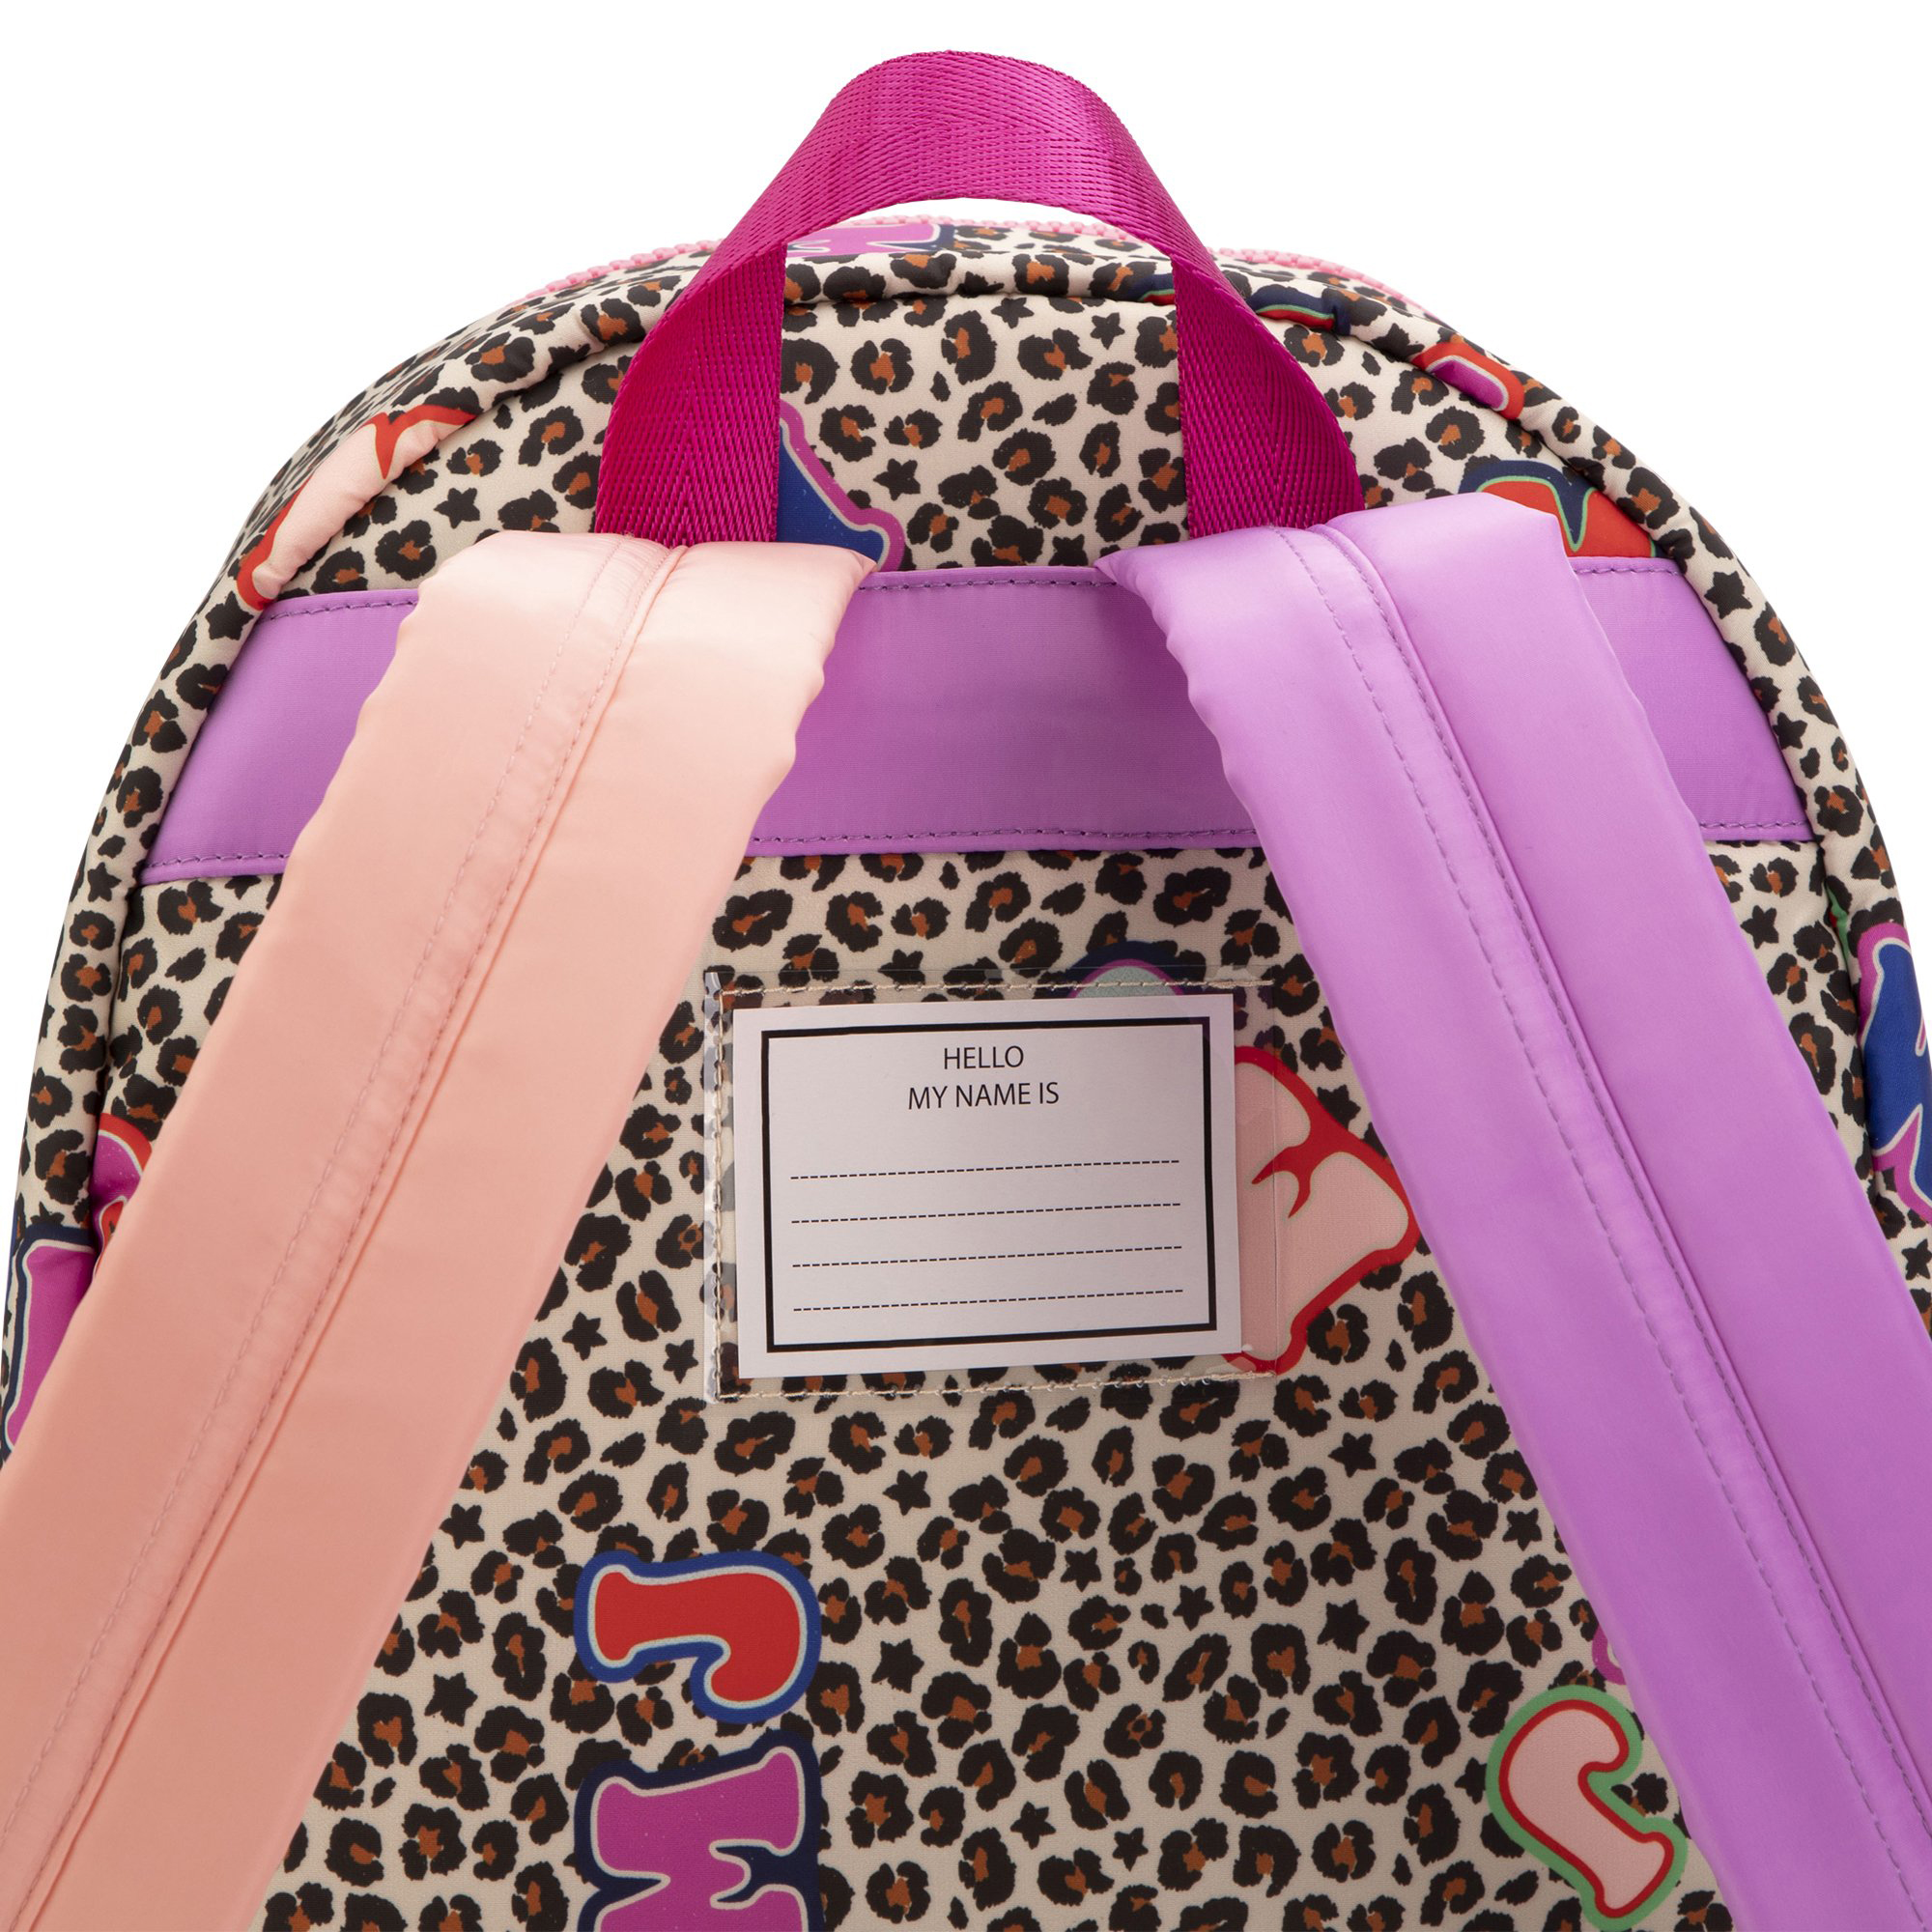 "THE BACKPACK" MARC JACOBS for GIRL